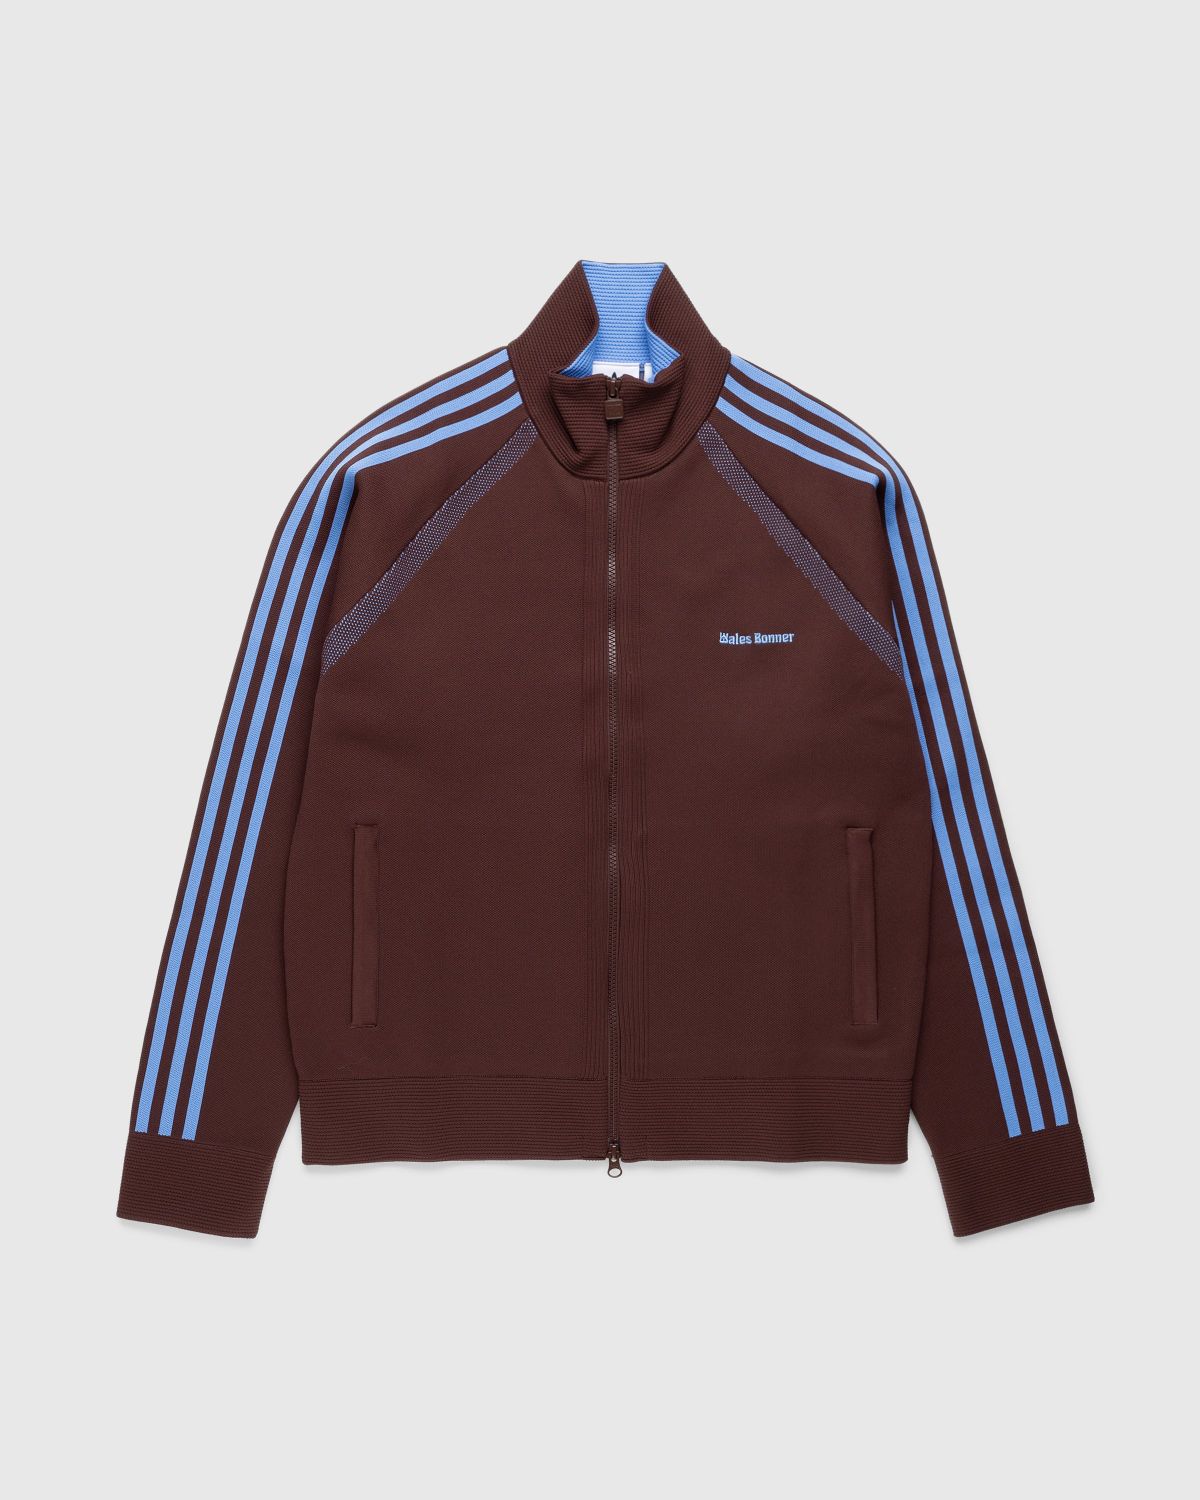 Adidas x Wales Bonner – Knit Track Top Mystery Brown - Tops - Brown - Image 1